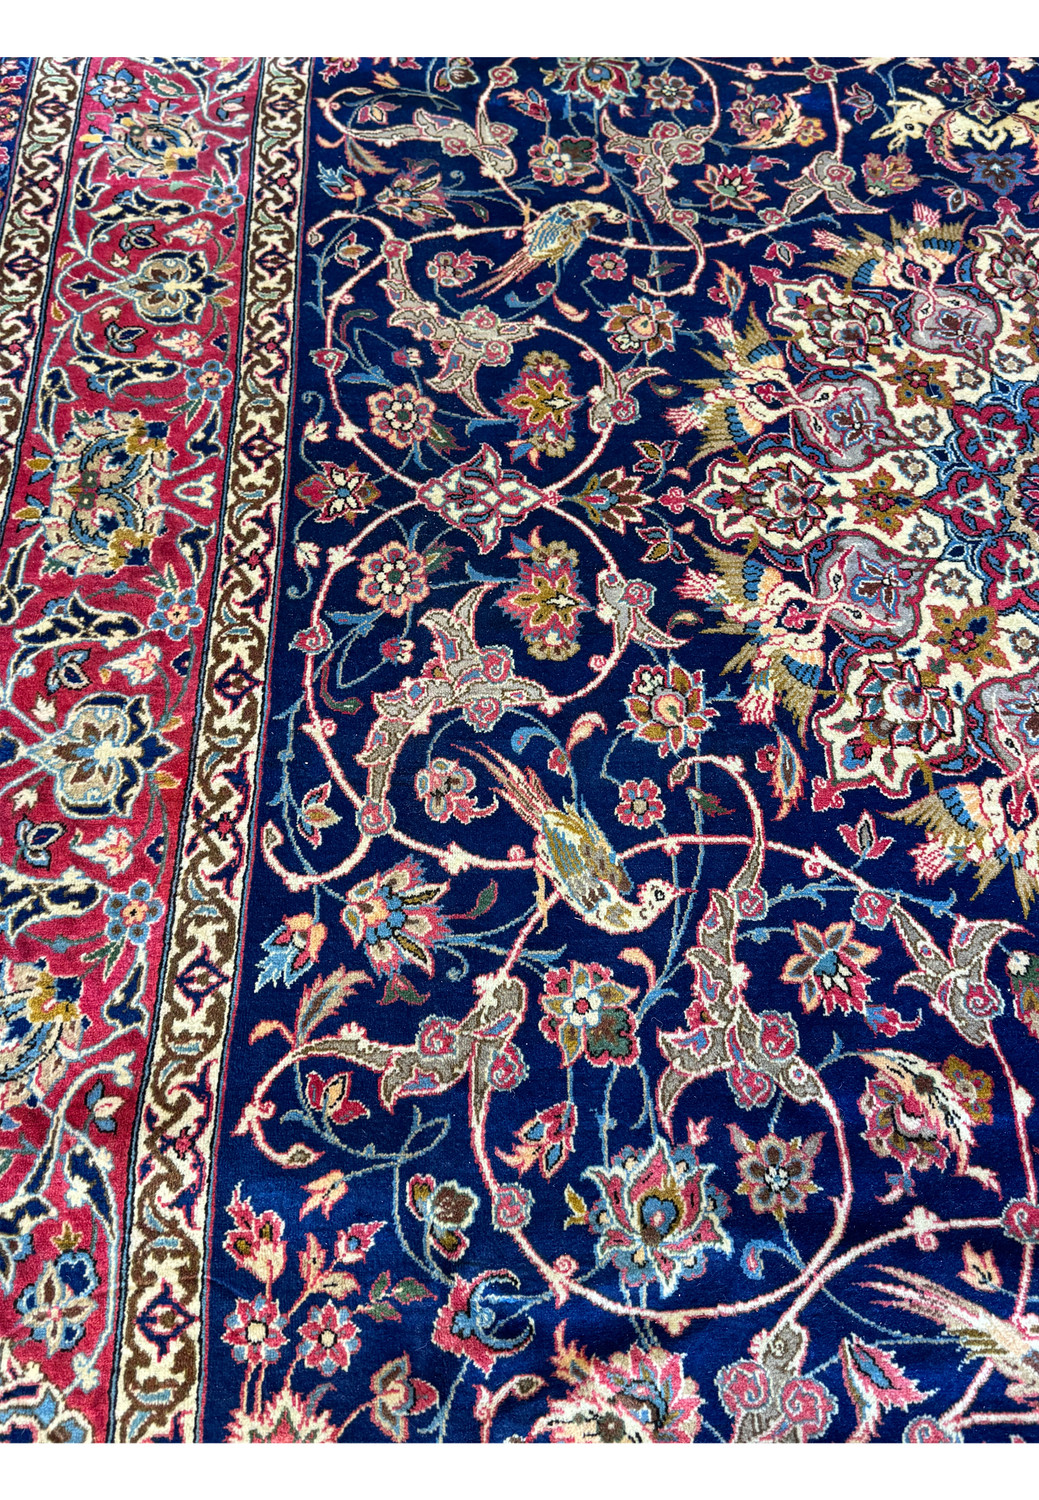 Close-up of a Persian Isfahan rug showing intricate floral designs and bird motifs with a red border.